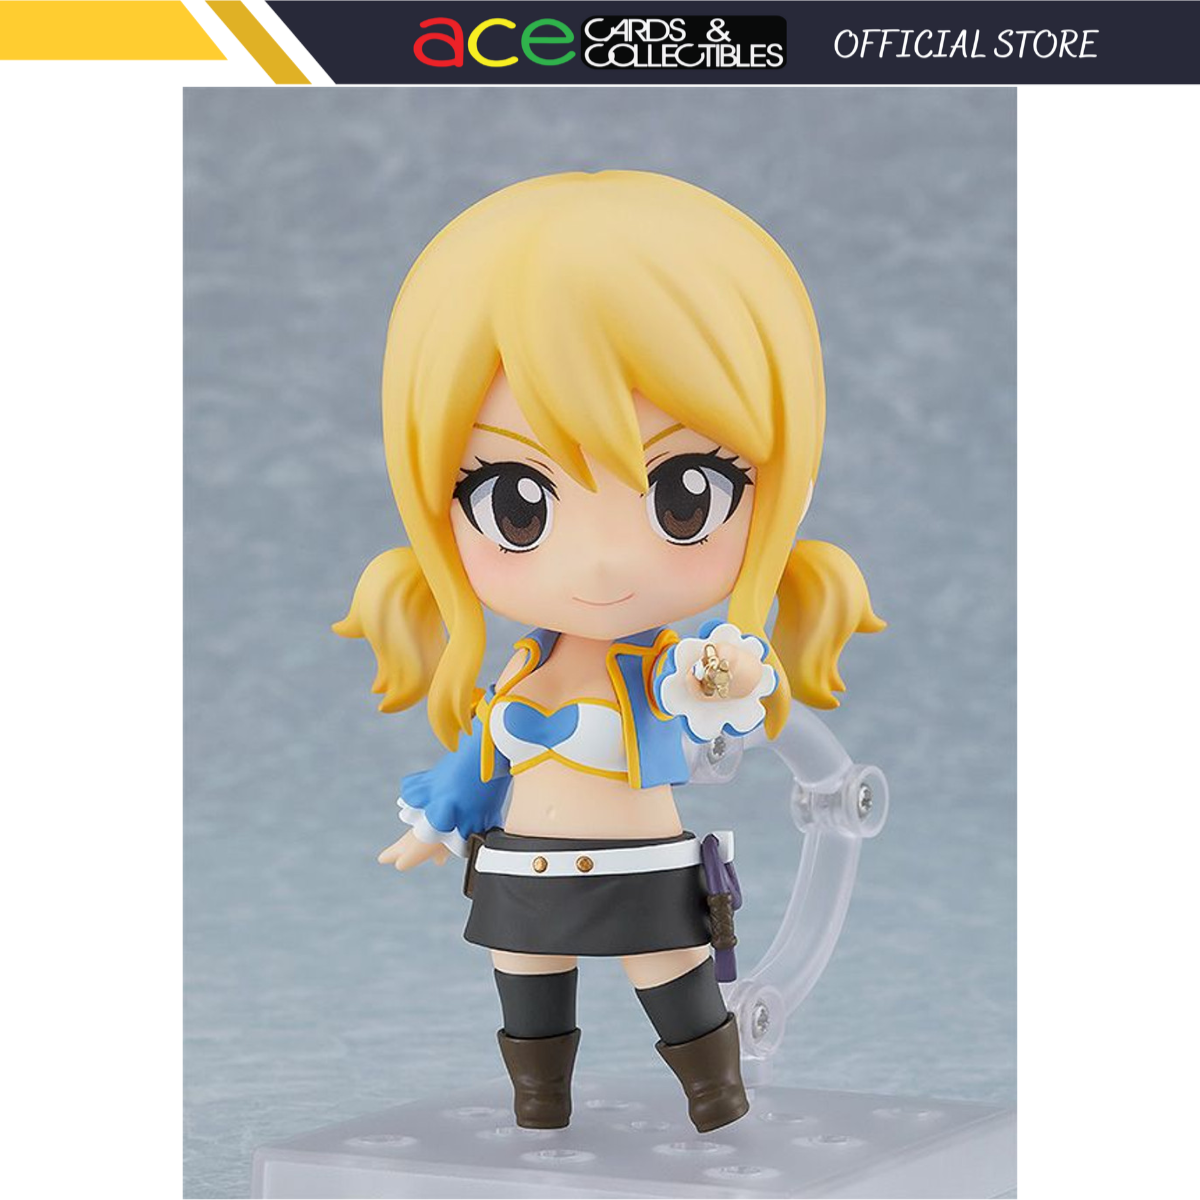 Fairy Tail Final Season Nendoroid [1924] "Lucy Heartfilia"-Max Factory-Ace Cards & Collectibles